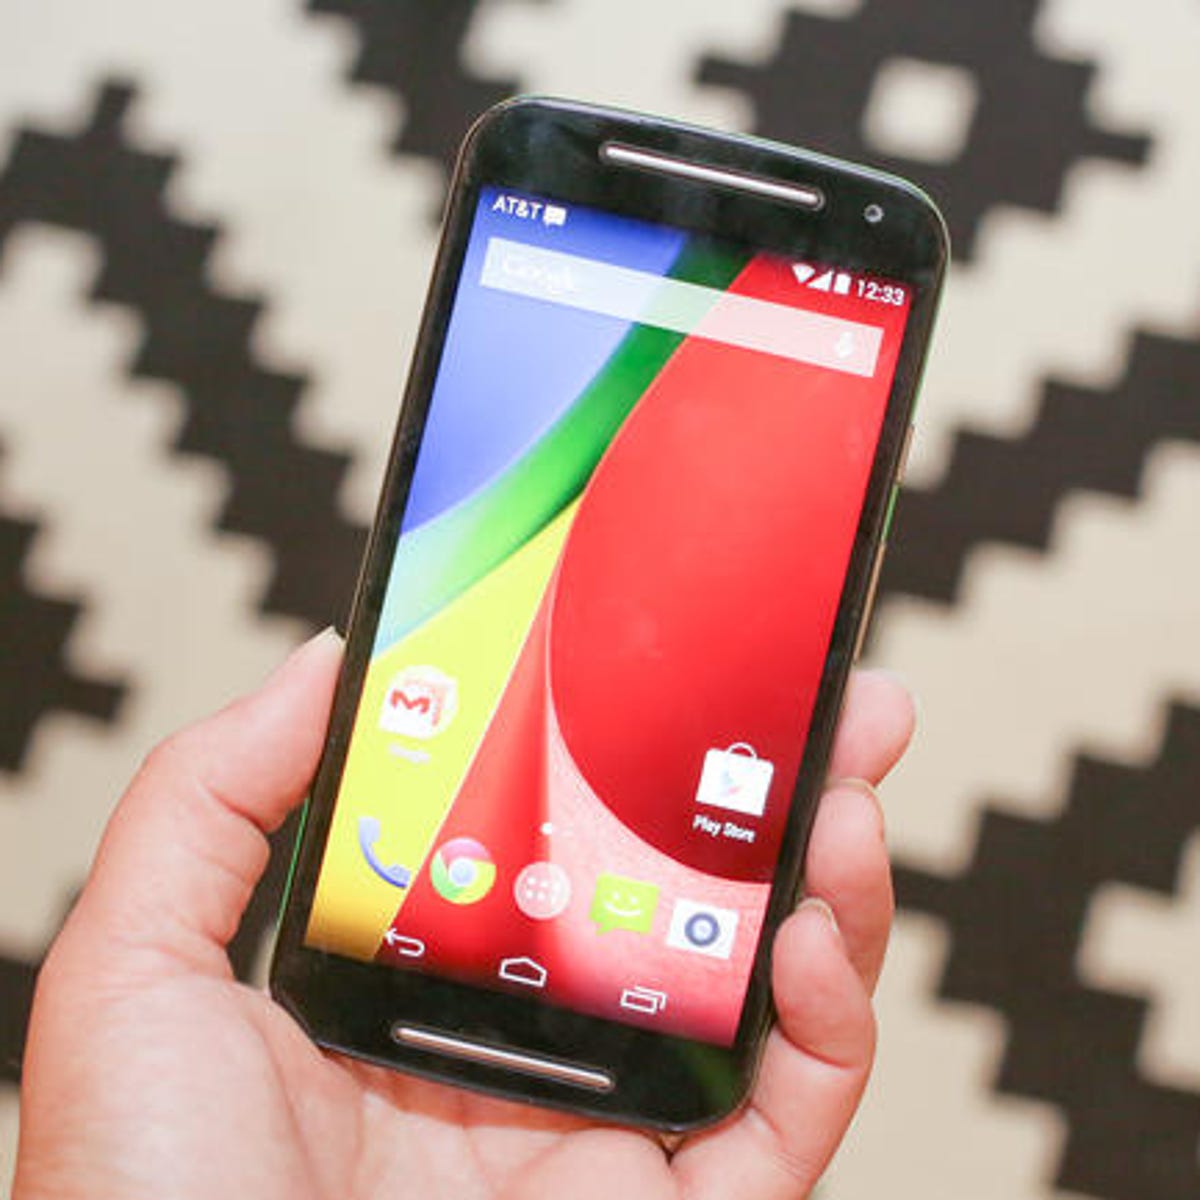 Motorola Moto G review: Third time's a charm, but wants for LTE - CNET